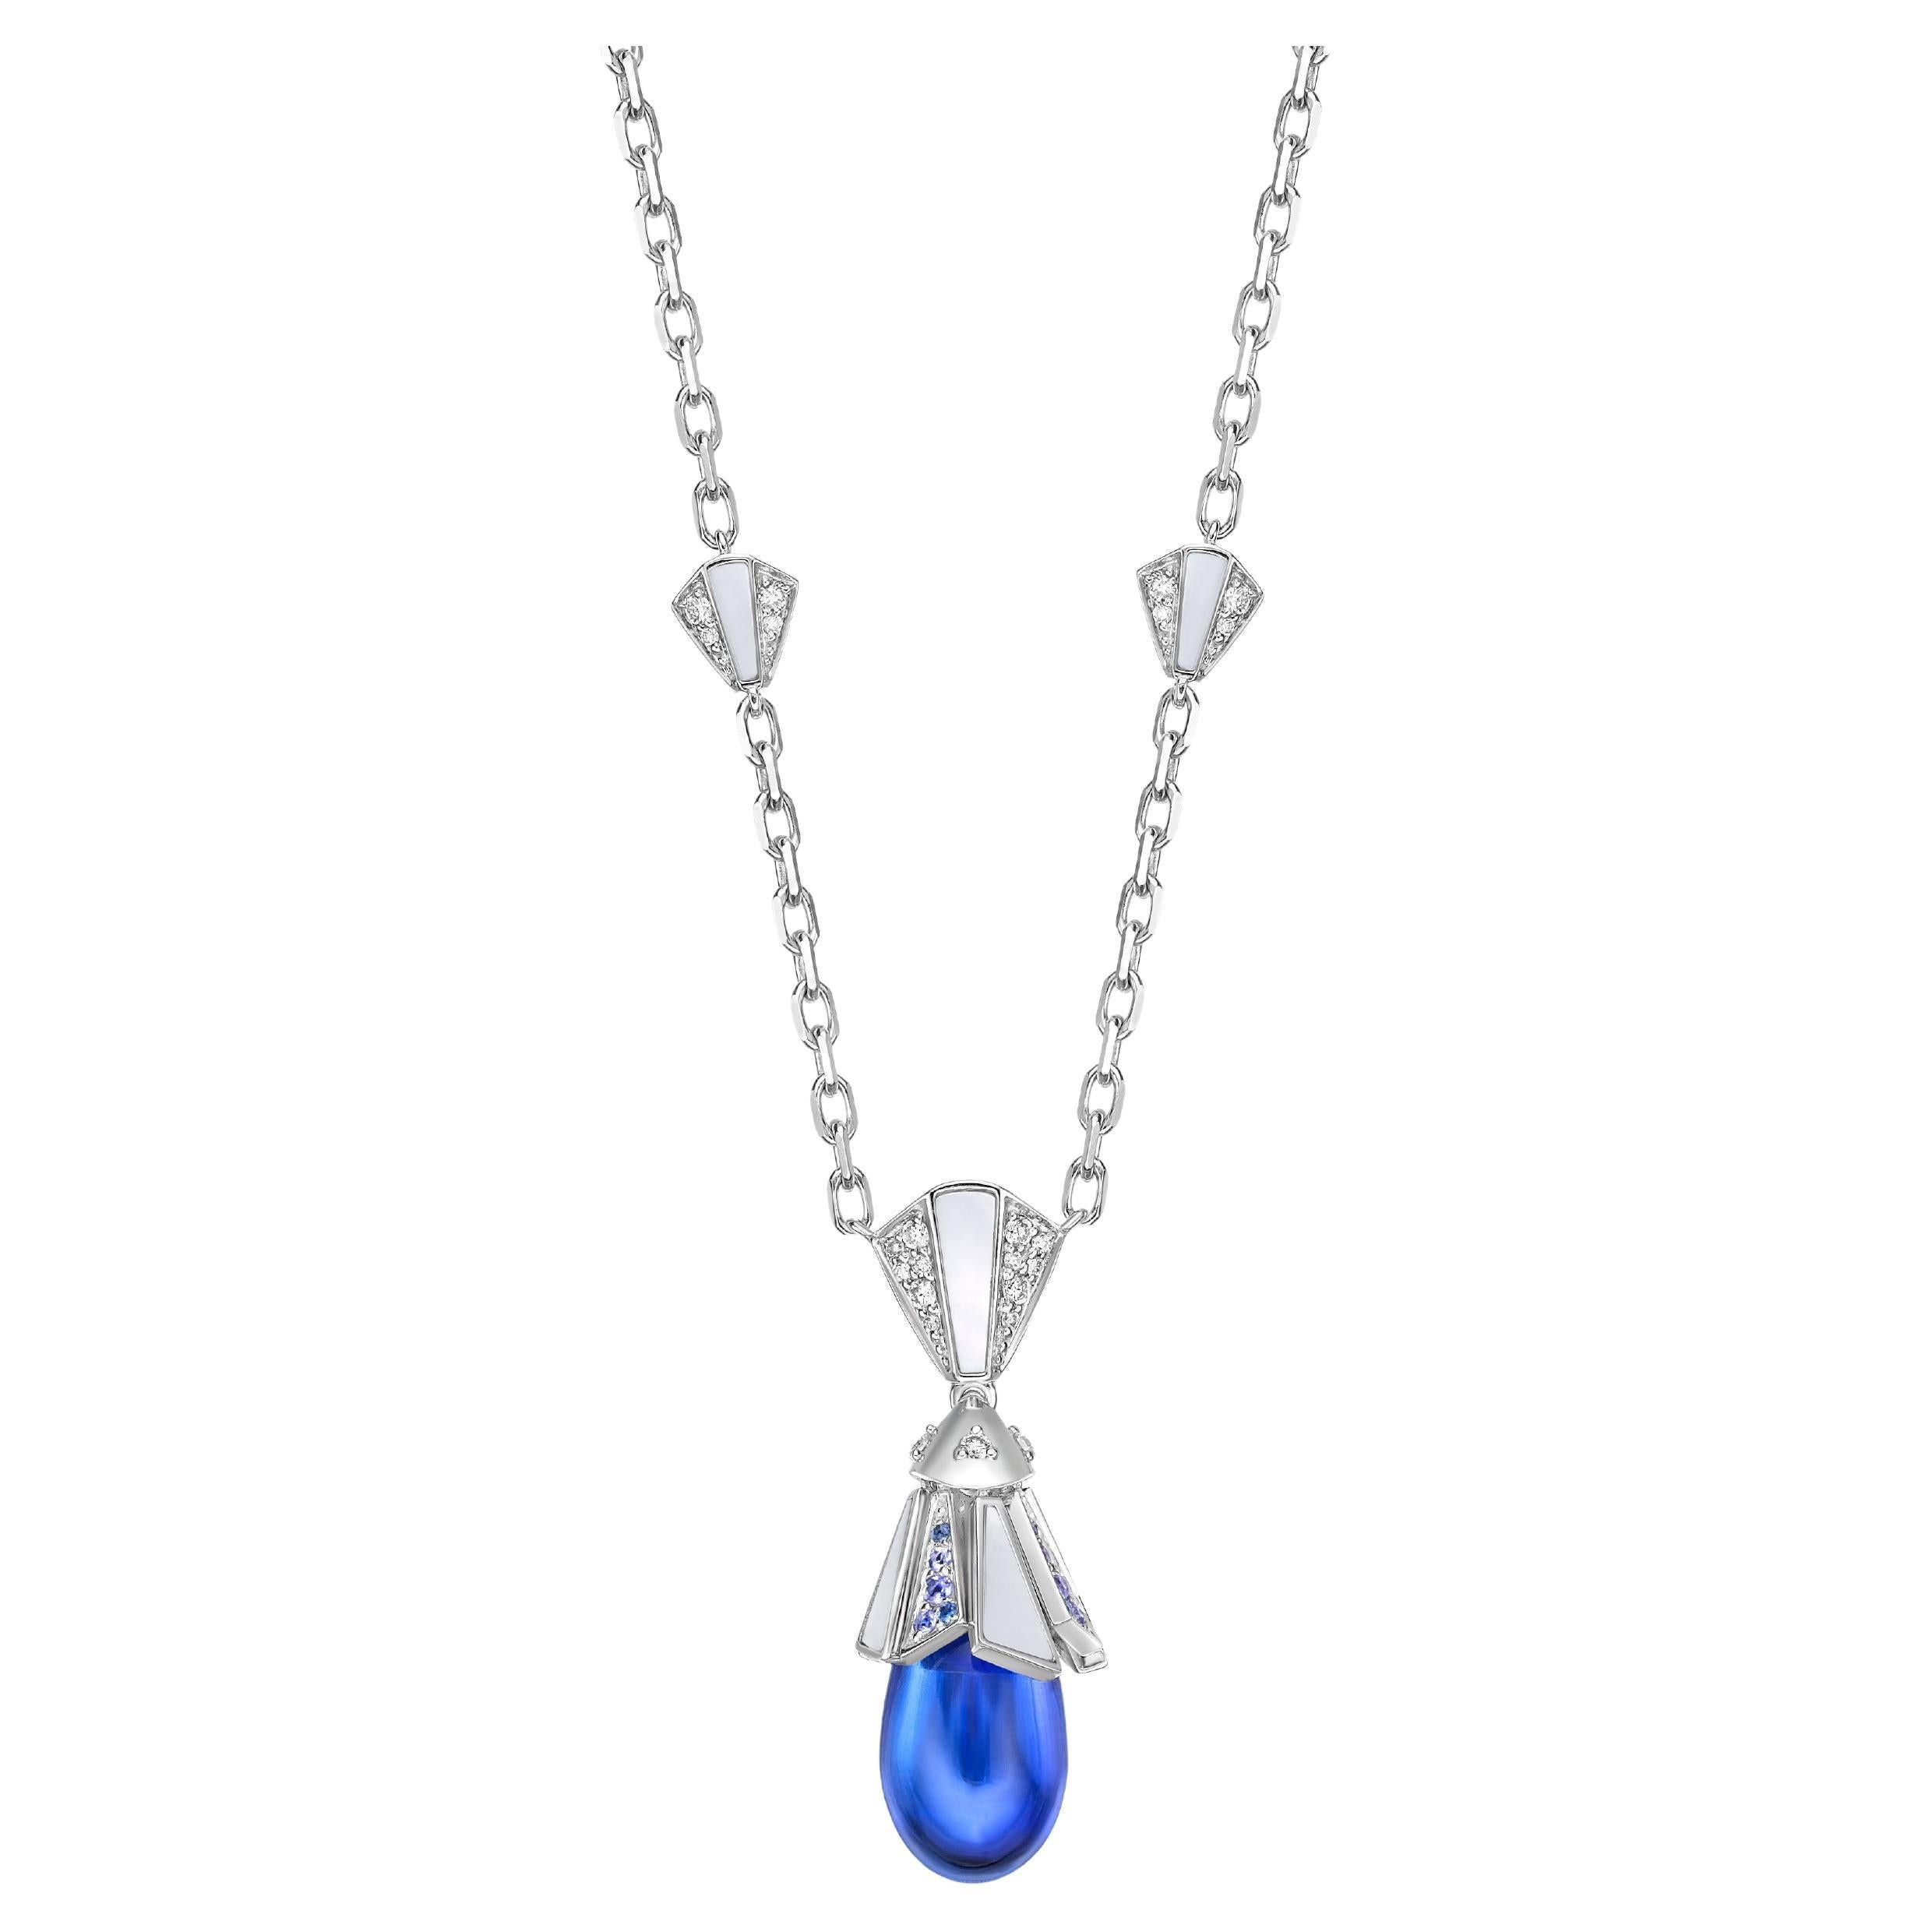 11.08 Carat Tanzanite Necklace in 18Karat White Gold with Multi stone. For Sale